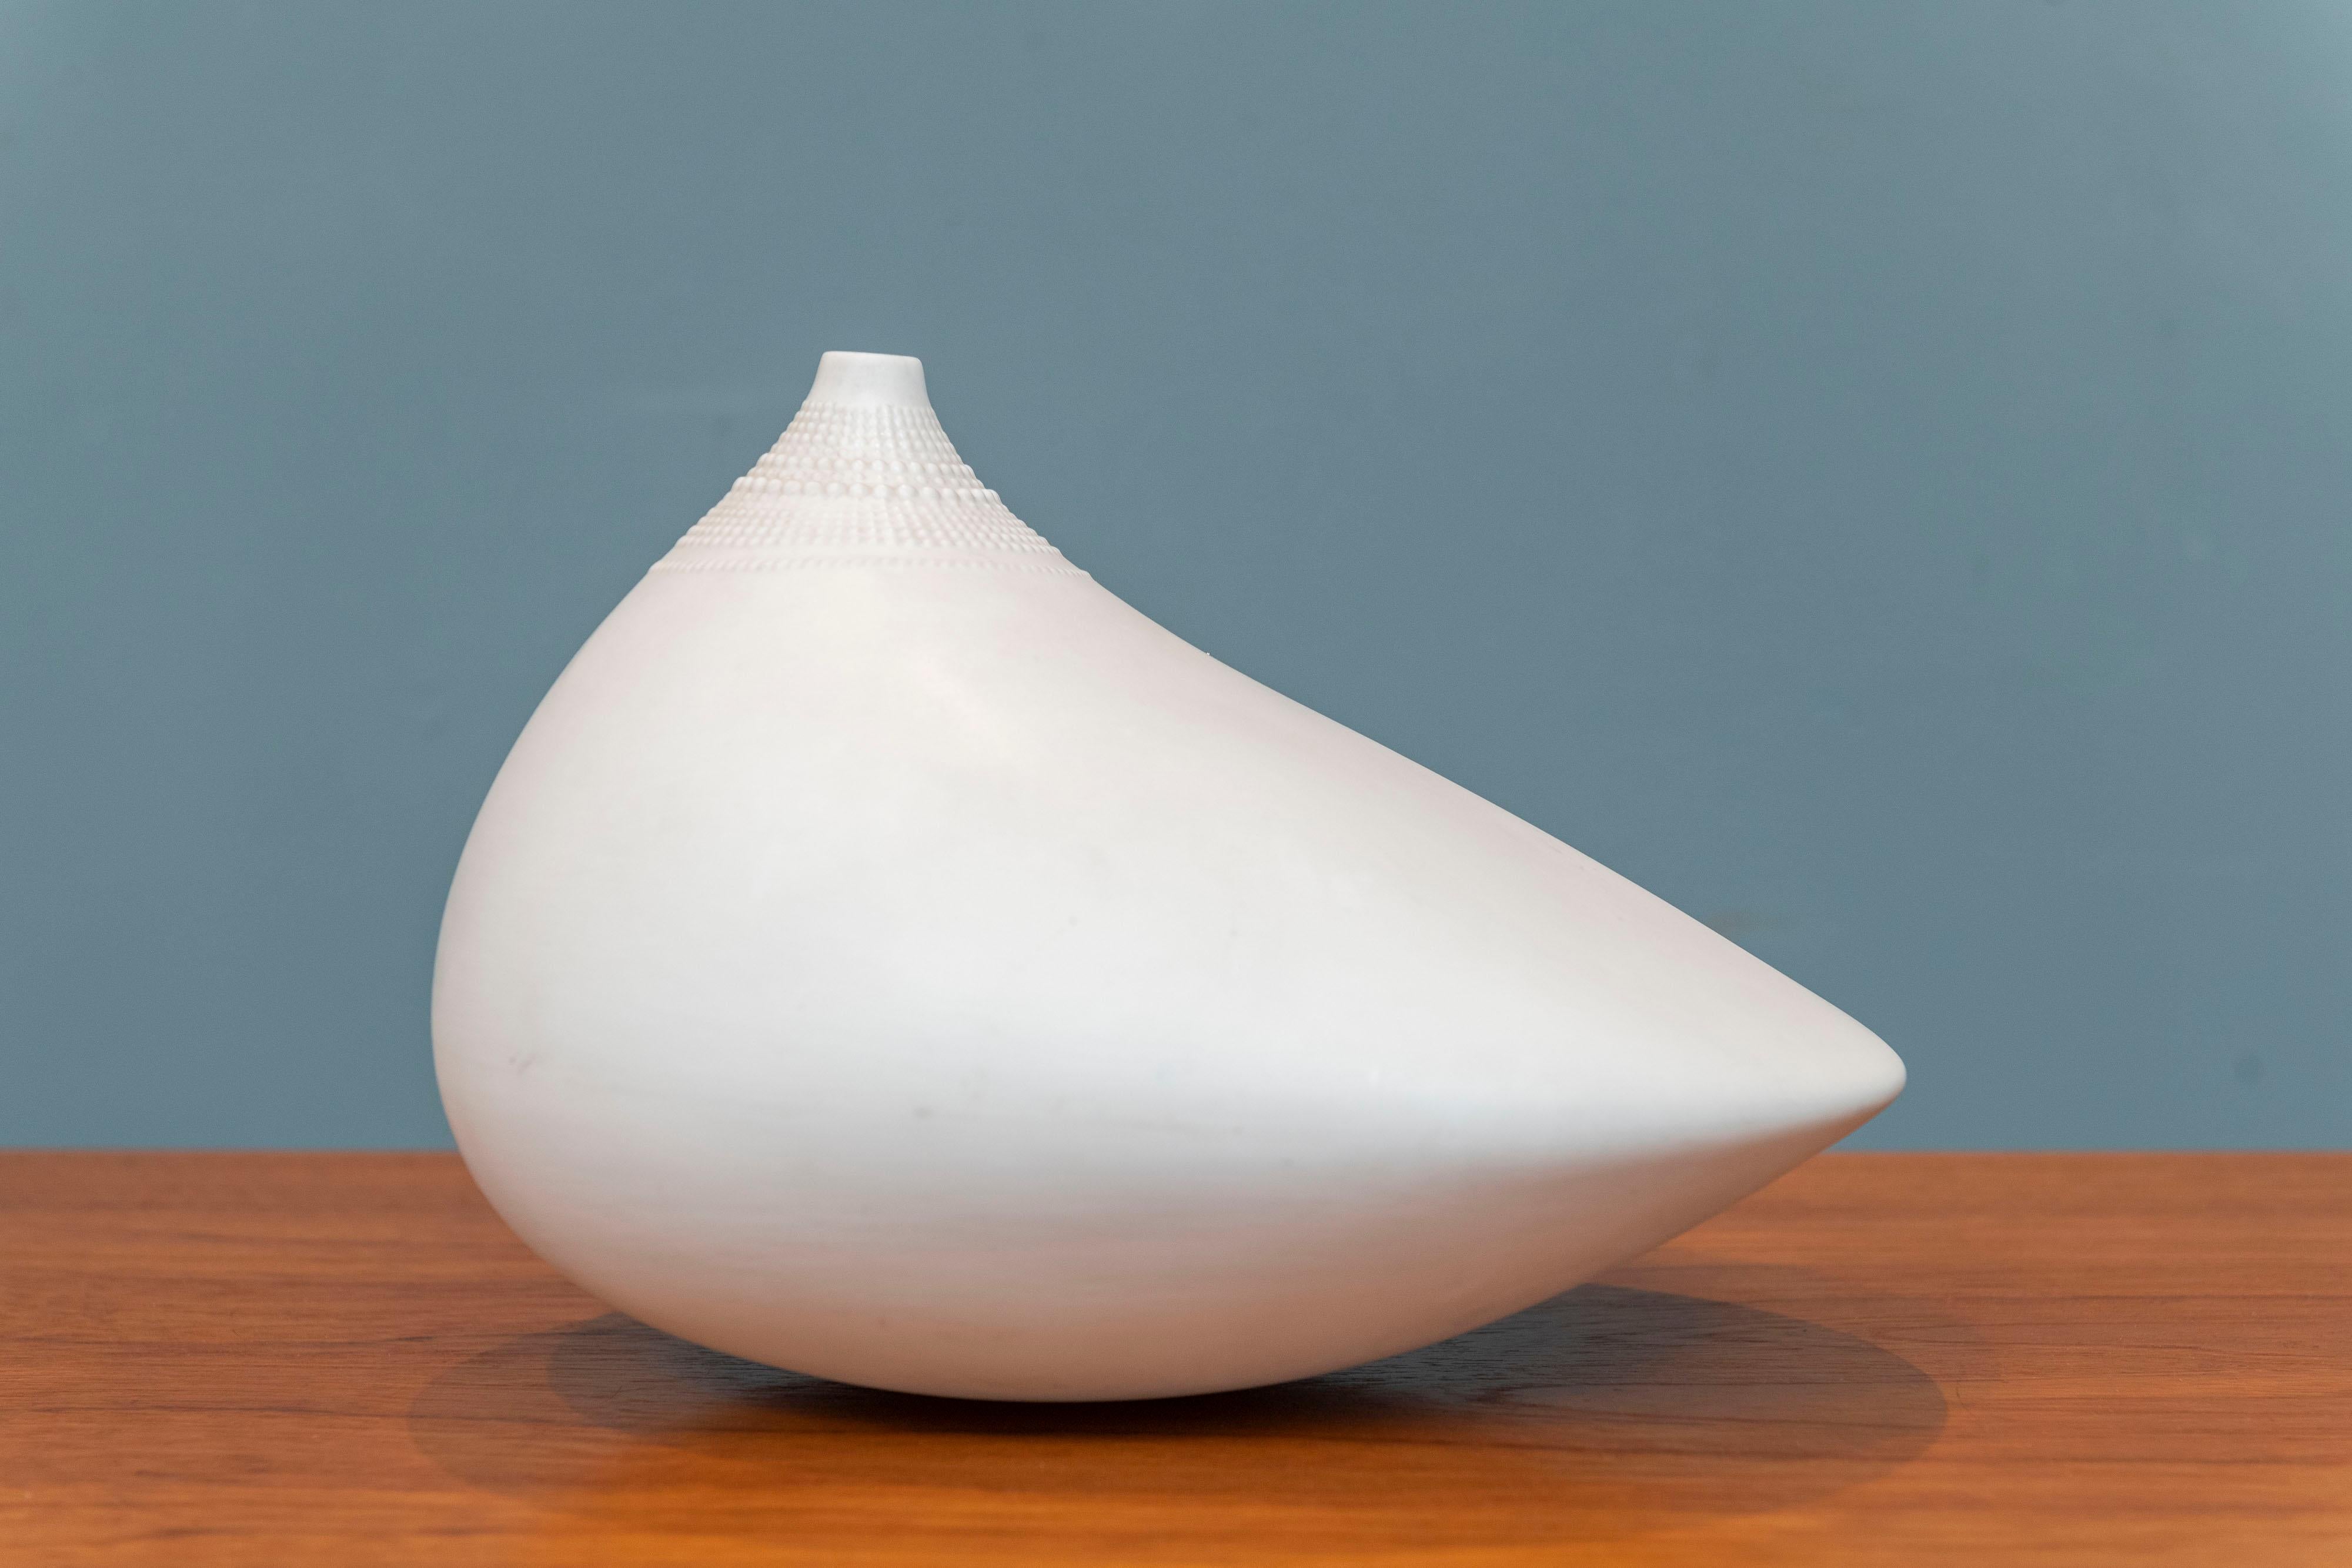 Tapio Wirkkala design Pollo vase for Rosenthal Studio Line, Germany. 
Rare larger size vase or vessel seldom seen compared with the much smaller common model. A wonderful object or vase, signed.